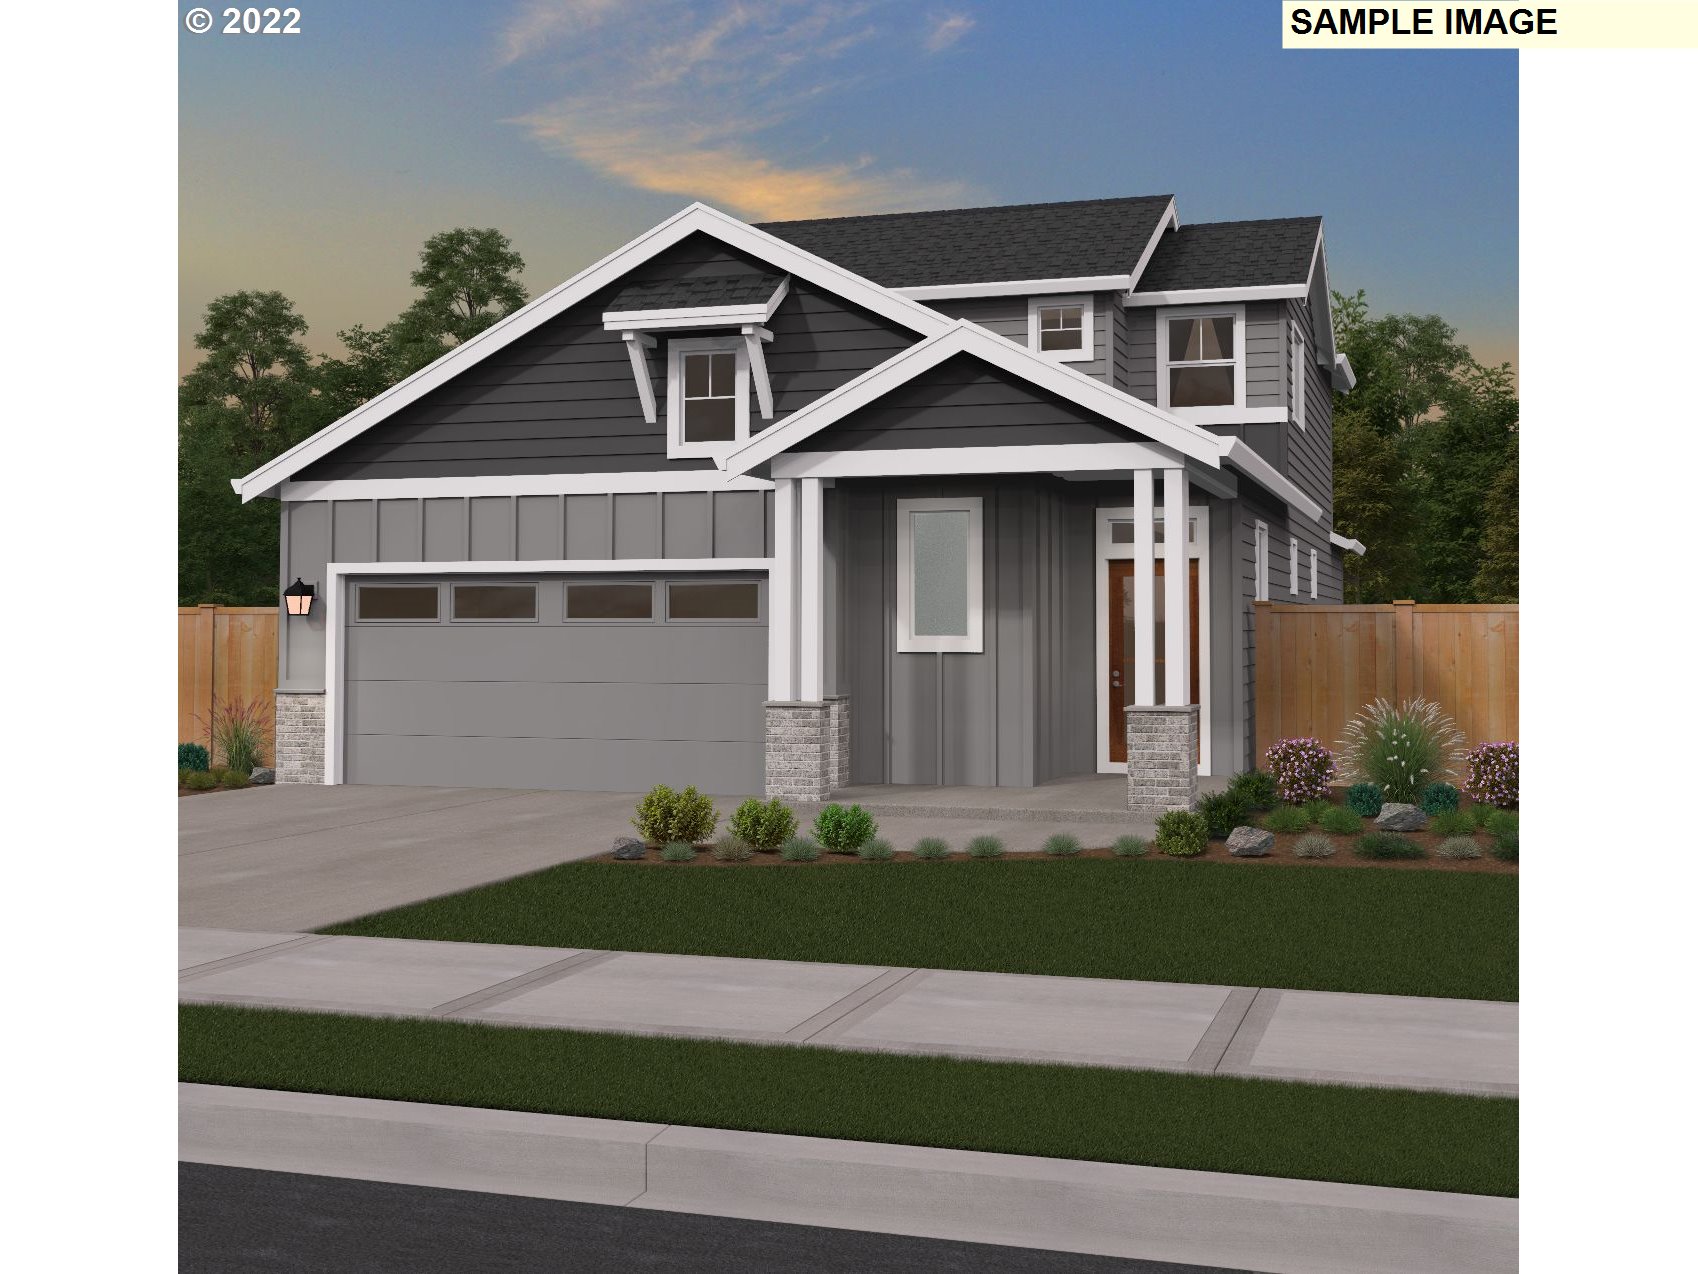 New community - Primary on Main! This home will have 3-4 bedrooms, 2.5 bath, loft, covered back deck. Includes slab quartz in the kitchen, SS appliances, Smart Home Technology and much more.  Reputable builder with excellent Warranty program. Top Rate school district, close to shopping, entertainment and recreational trails and parks. Still time to select layout and all options.